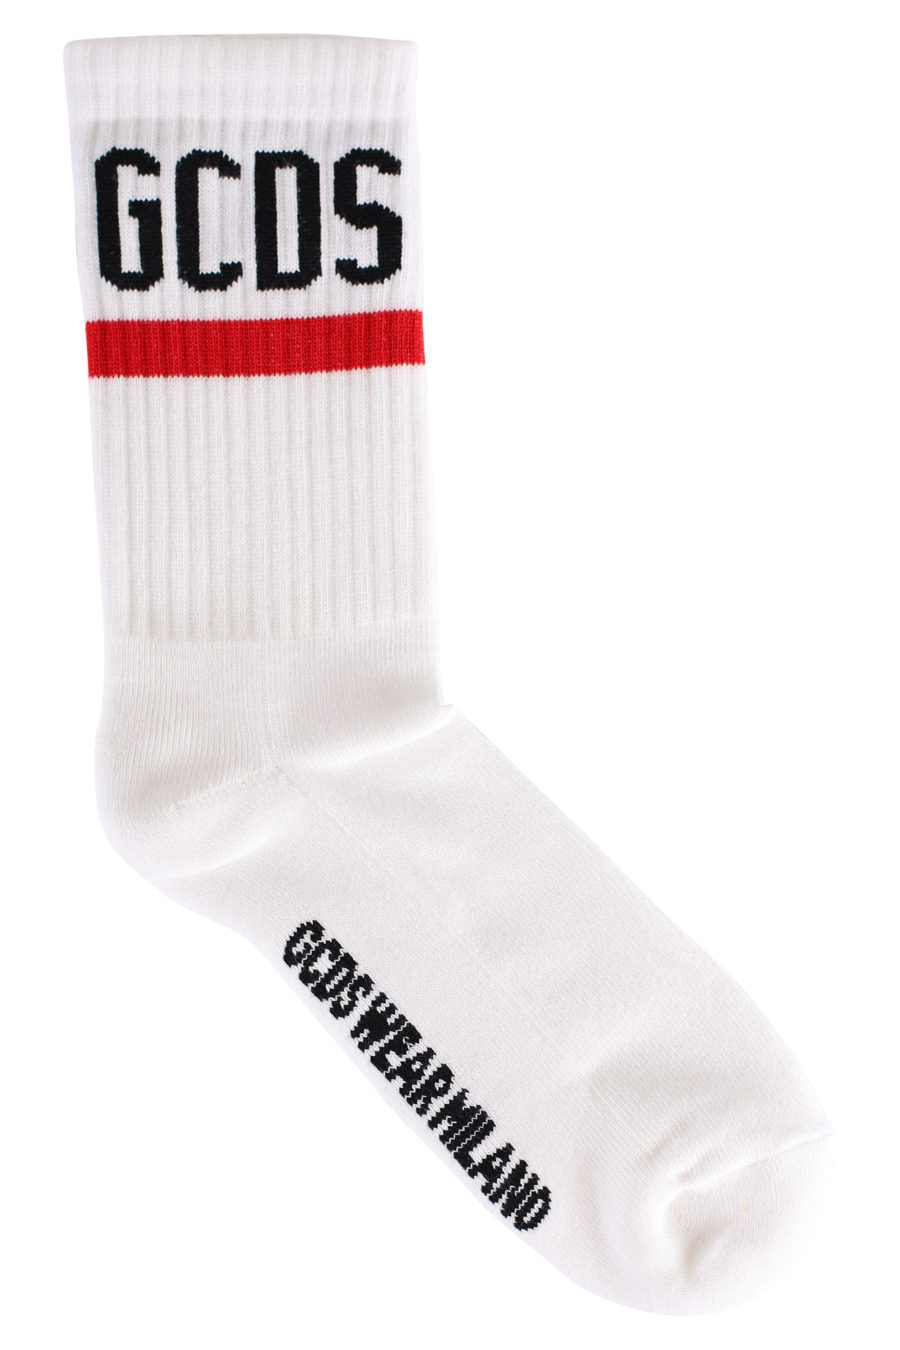 White socks with black logo and red line - IMG 1863